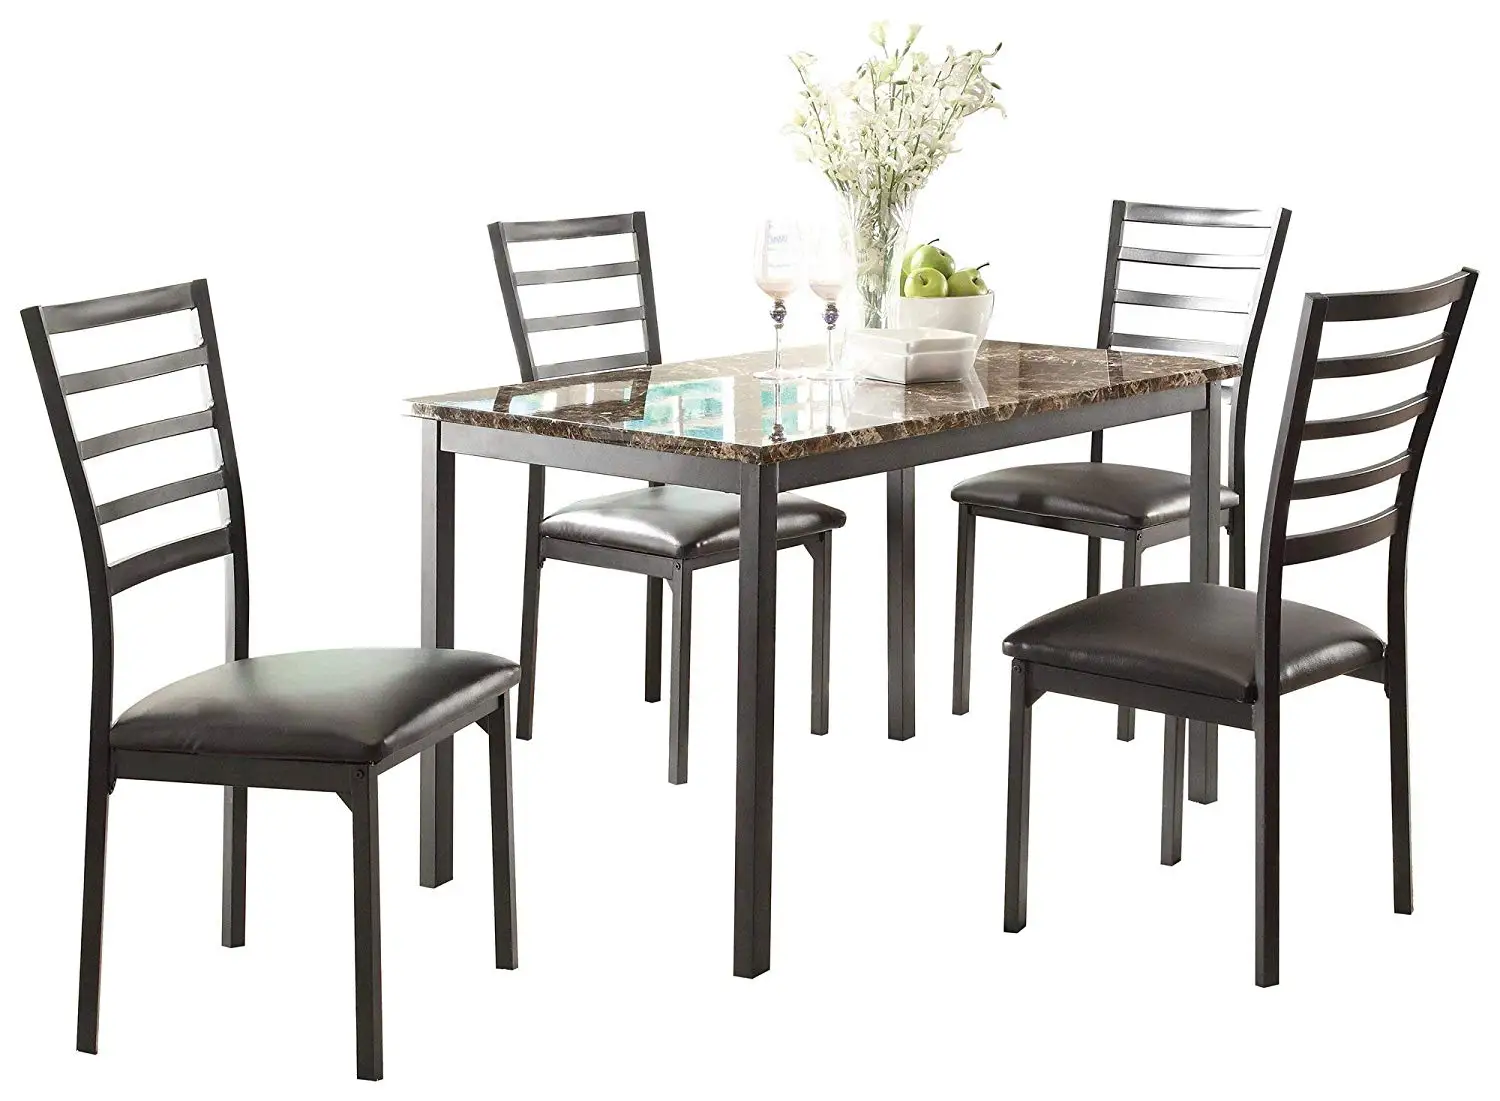 Cheap Metal Dining Chair, find Metal Dining Chair deals on line at